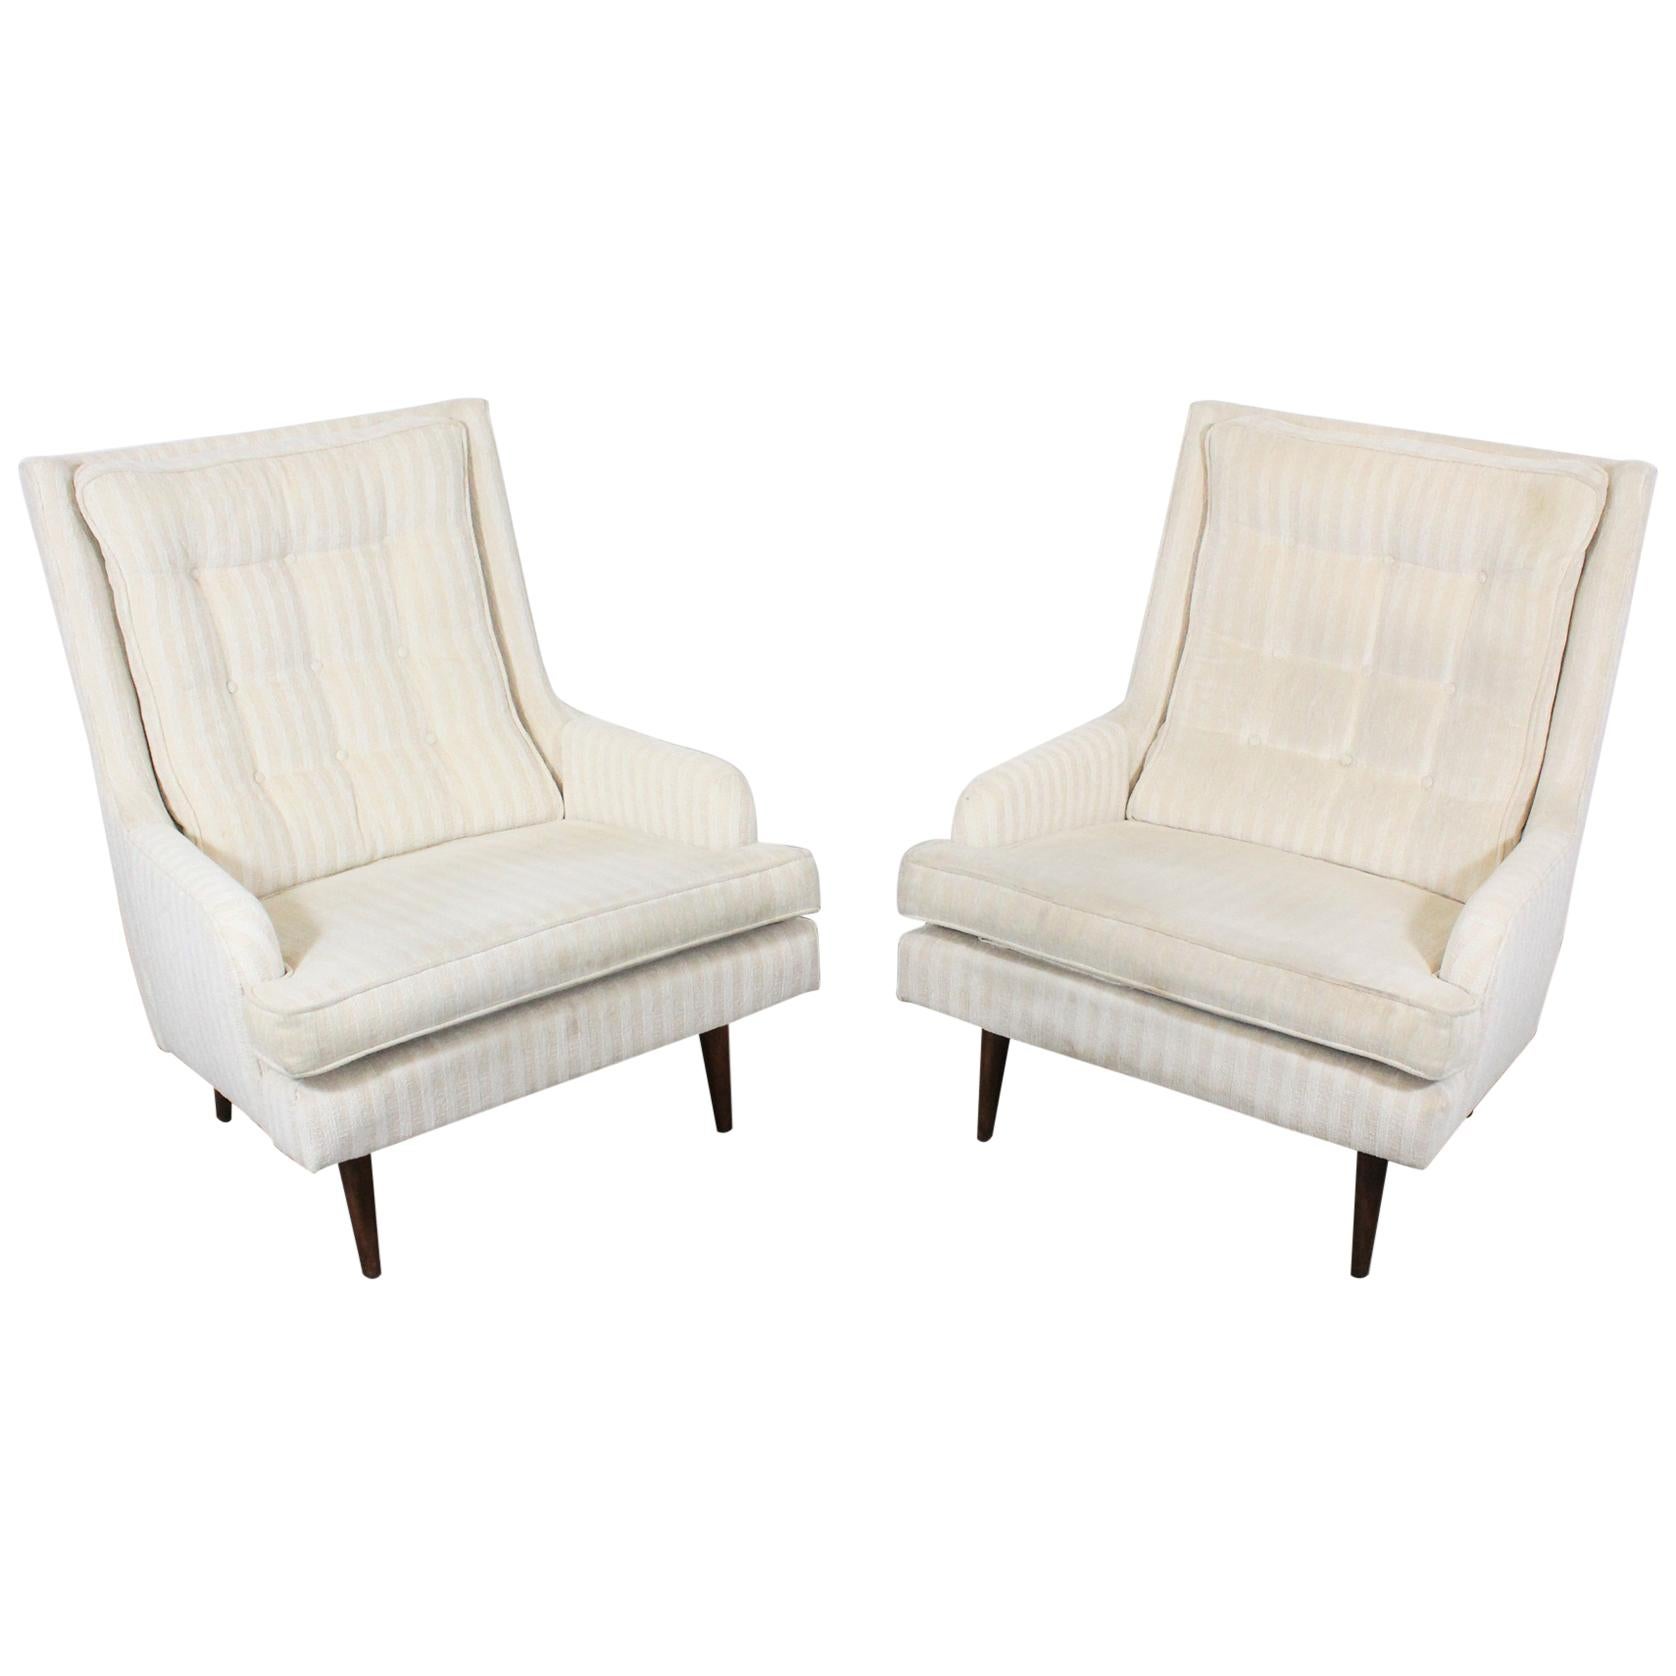 Pair of Midcentury Danish Modern Paul McCobb Style Lounge Chairs For Sale